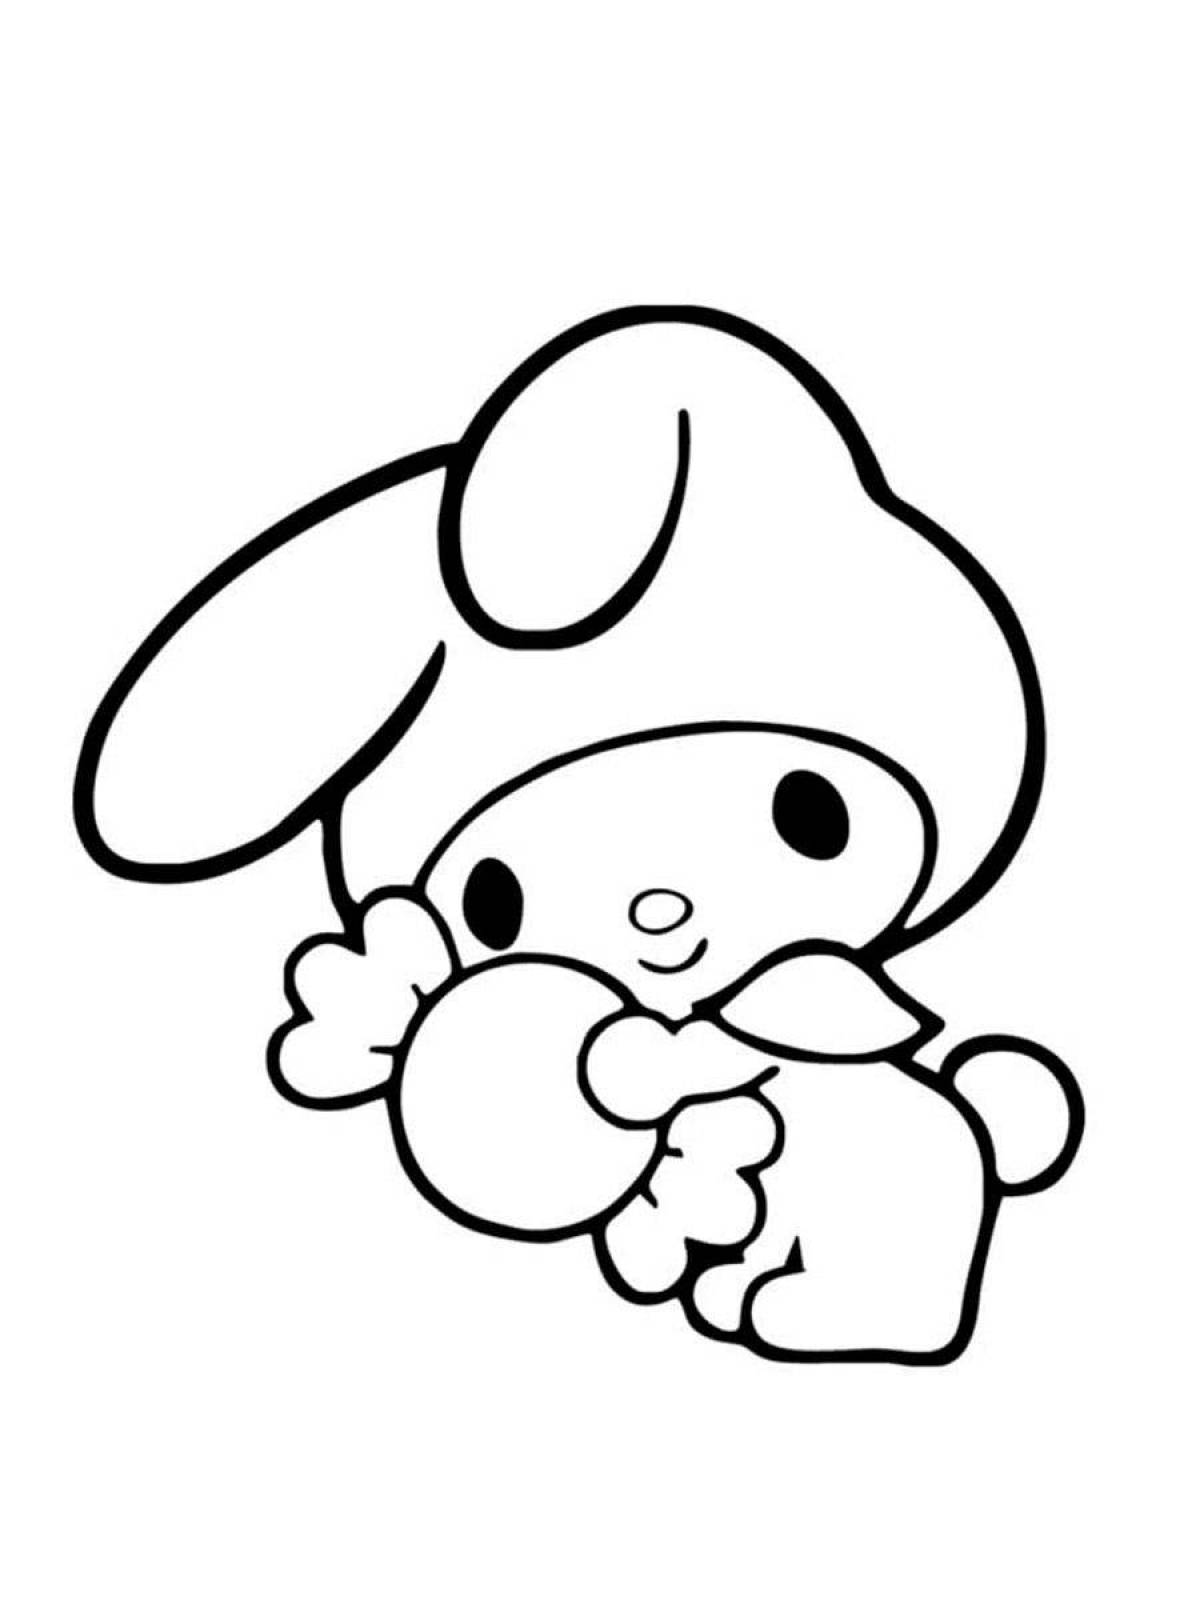 Glowing May melody hello kitty coloring page